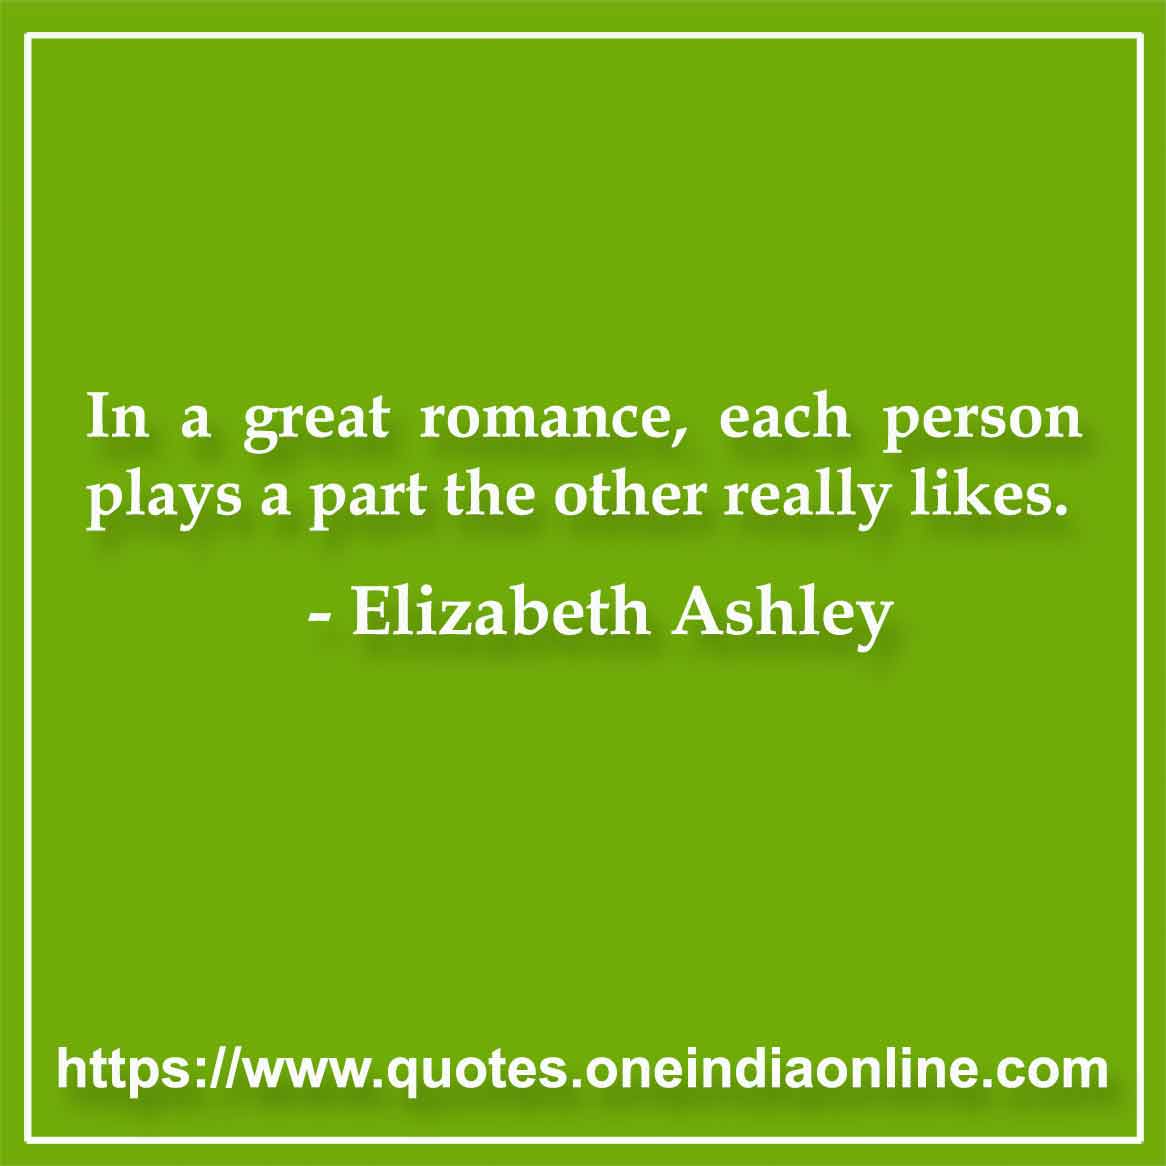 In a great romance, each person plays a part the other really likes.

-  by Elizabeth Ashley